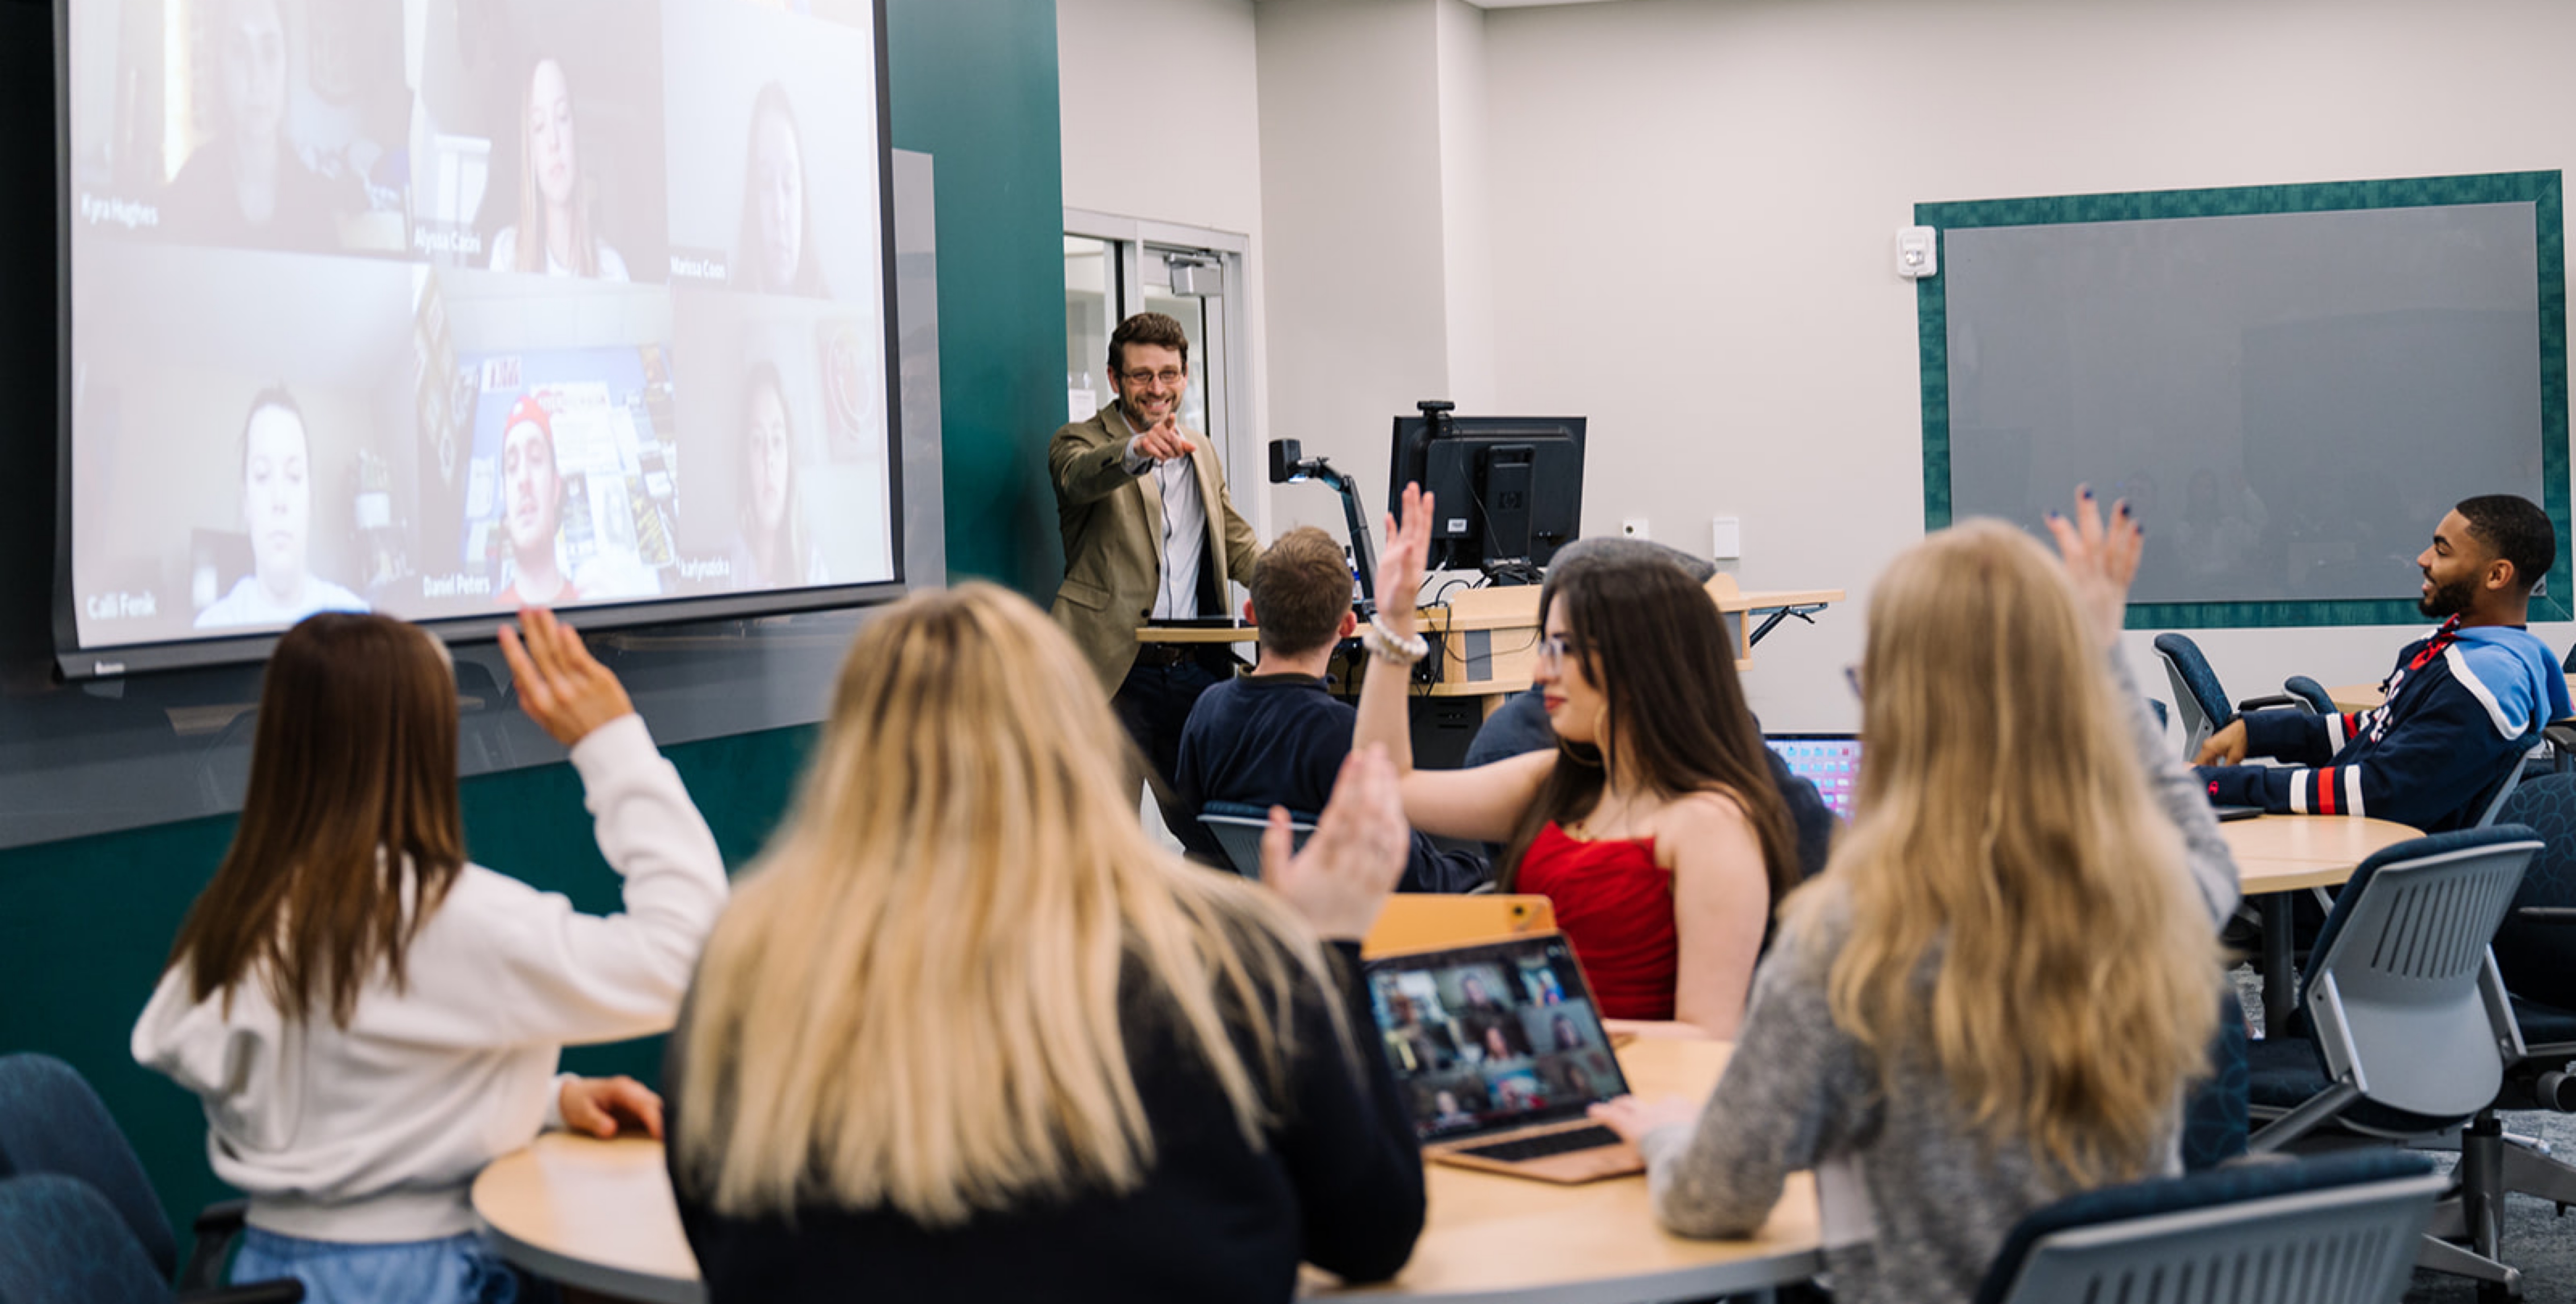 A smiling instructor calls on one of multiple students, whose hands are raised, while remote students look on via a Zoom call.